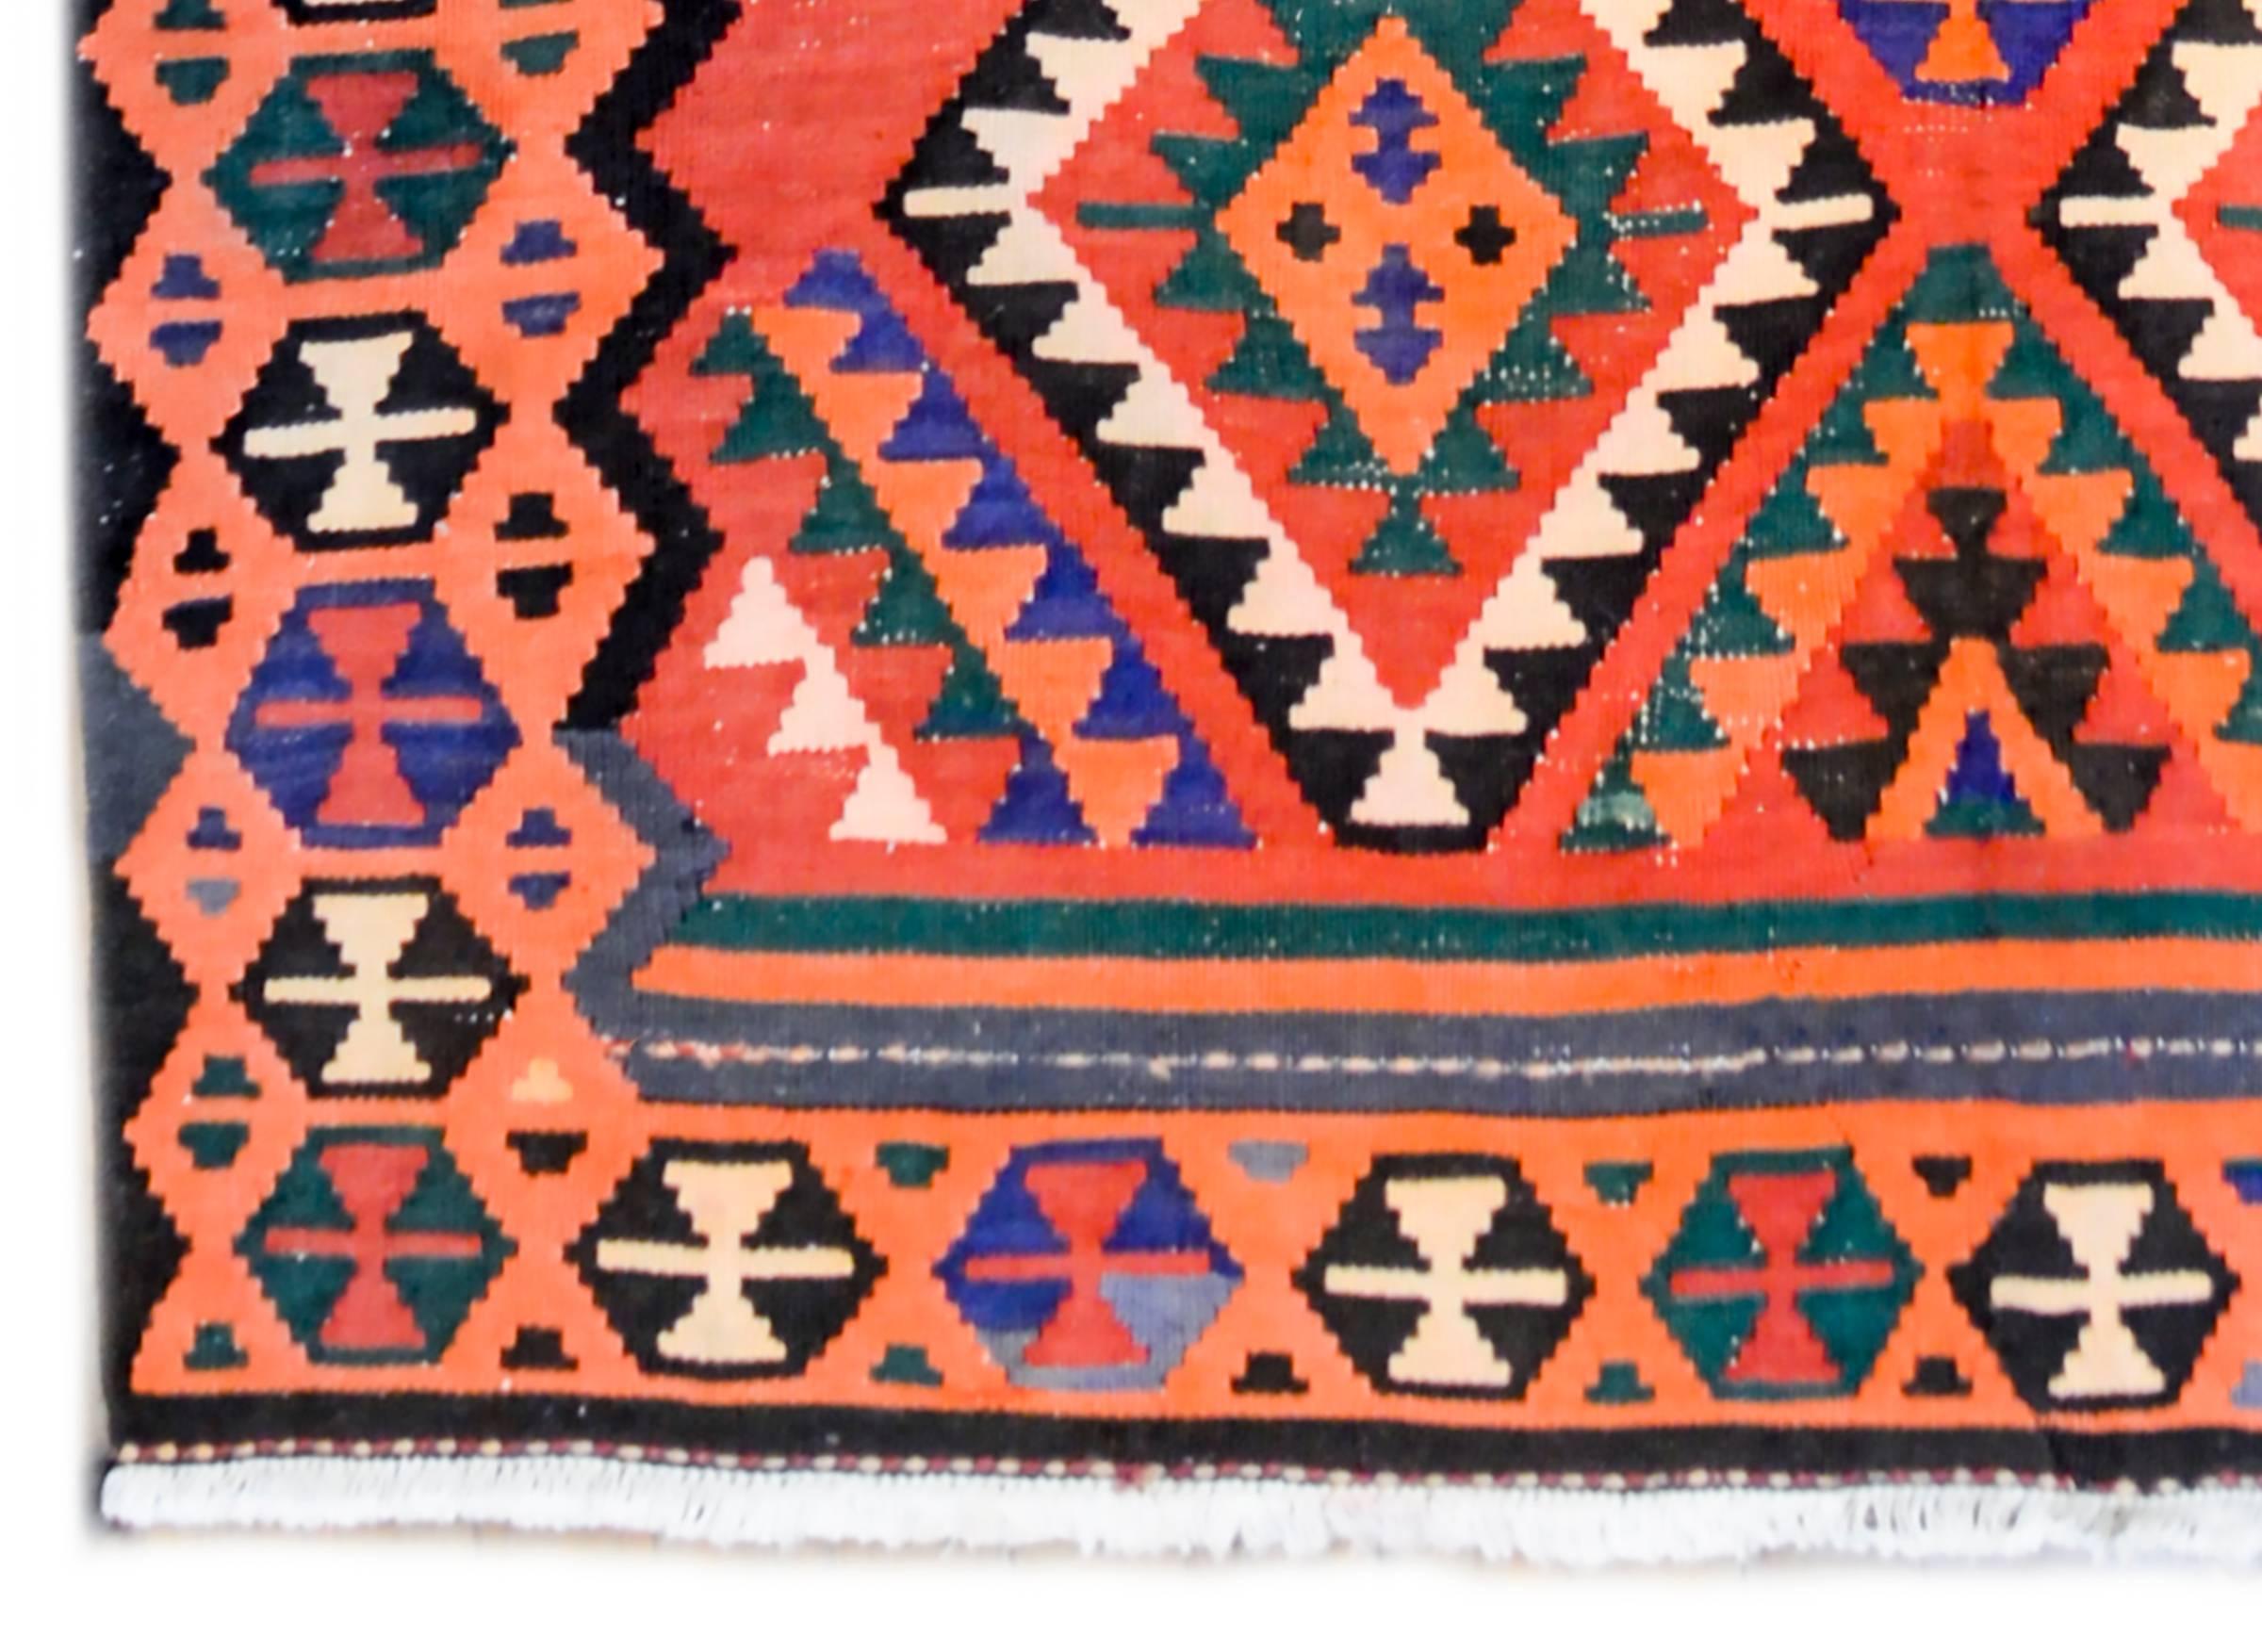 Vegetable Dyed Early 20th Century Qazvin Kilim Runner For Sale